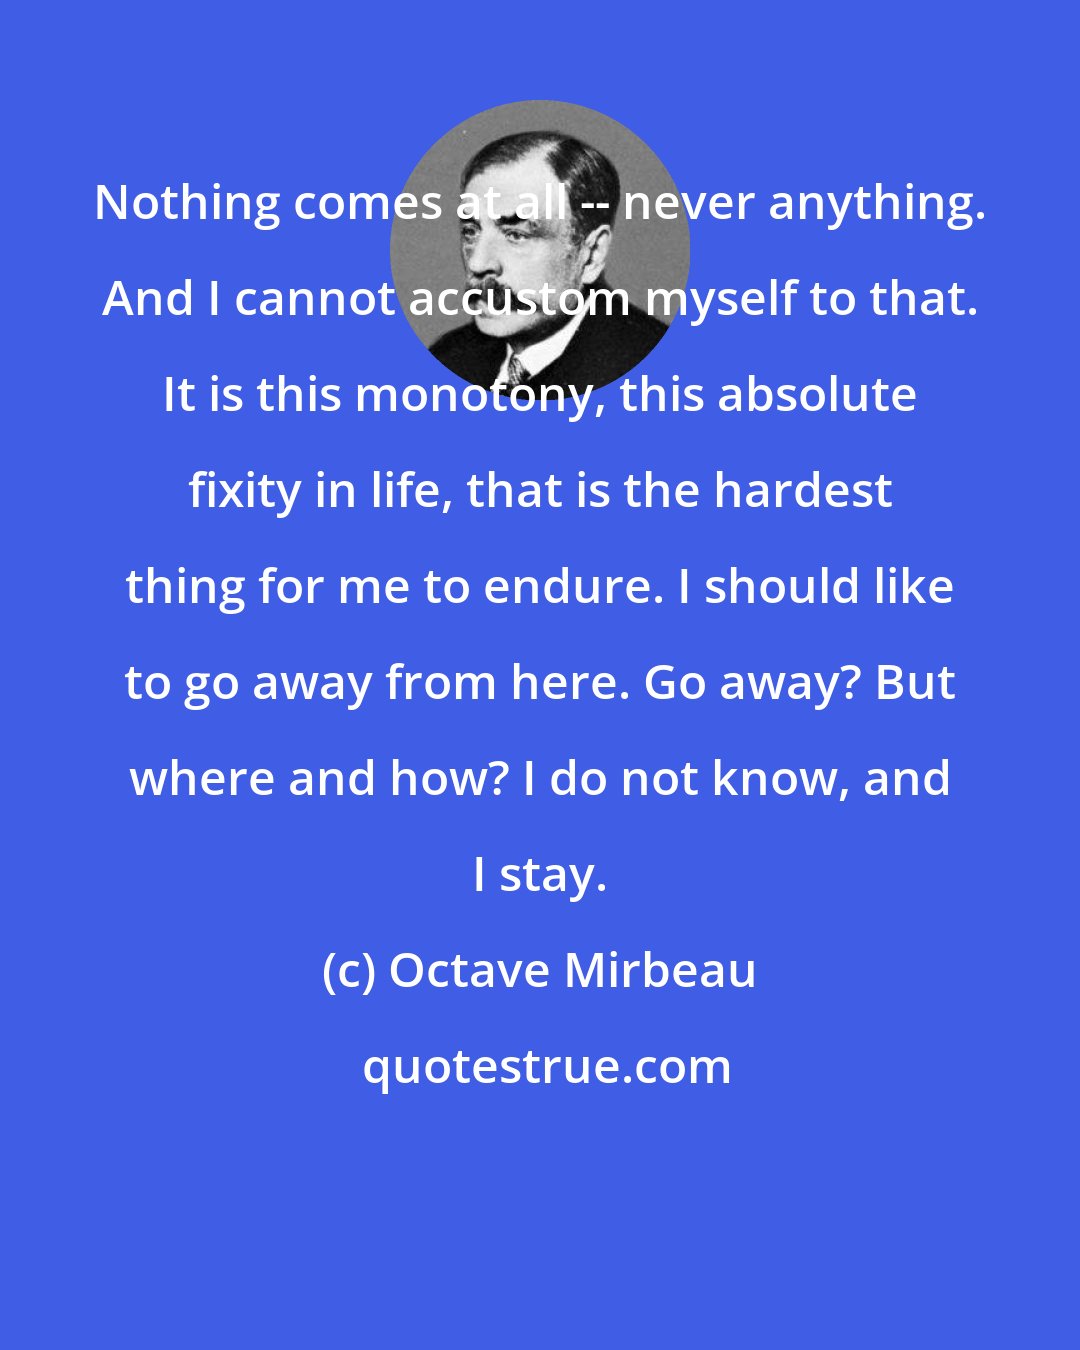 Octave Mirbeau: Nothing comes at all -- never anything. And I cannot accustom myself to that. It is this monotony, this absolute fixity in life, that is the hardest thing for me to endure. I should like to go away from here. Go away? But where and how? I do not know, and I stay.